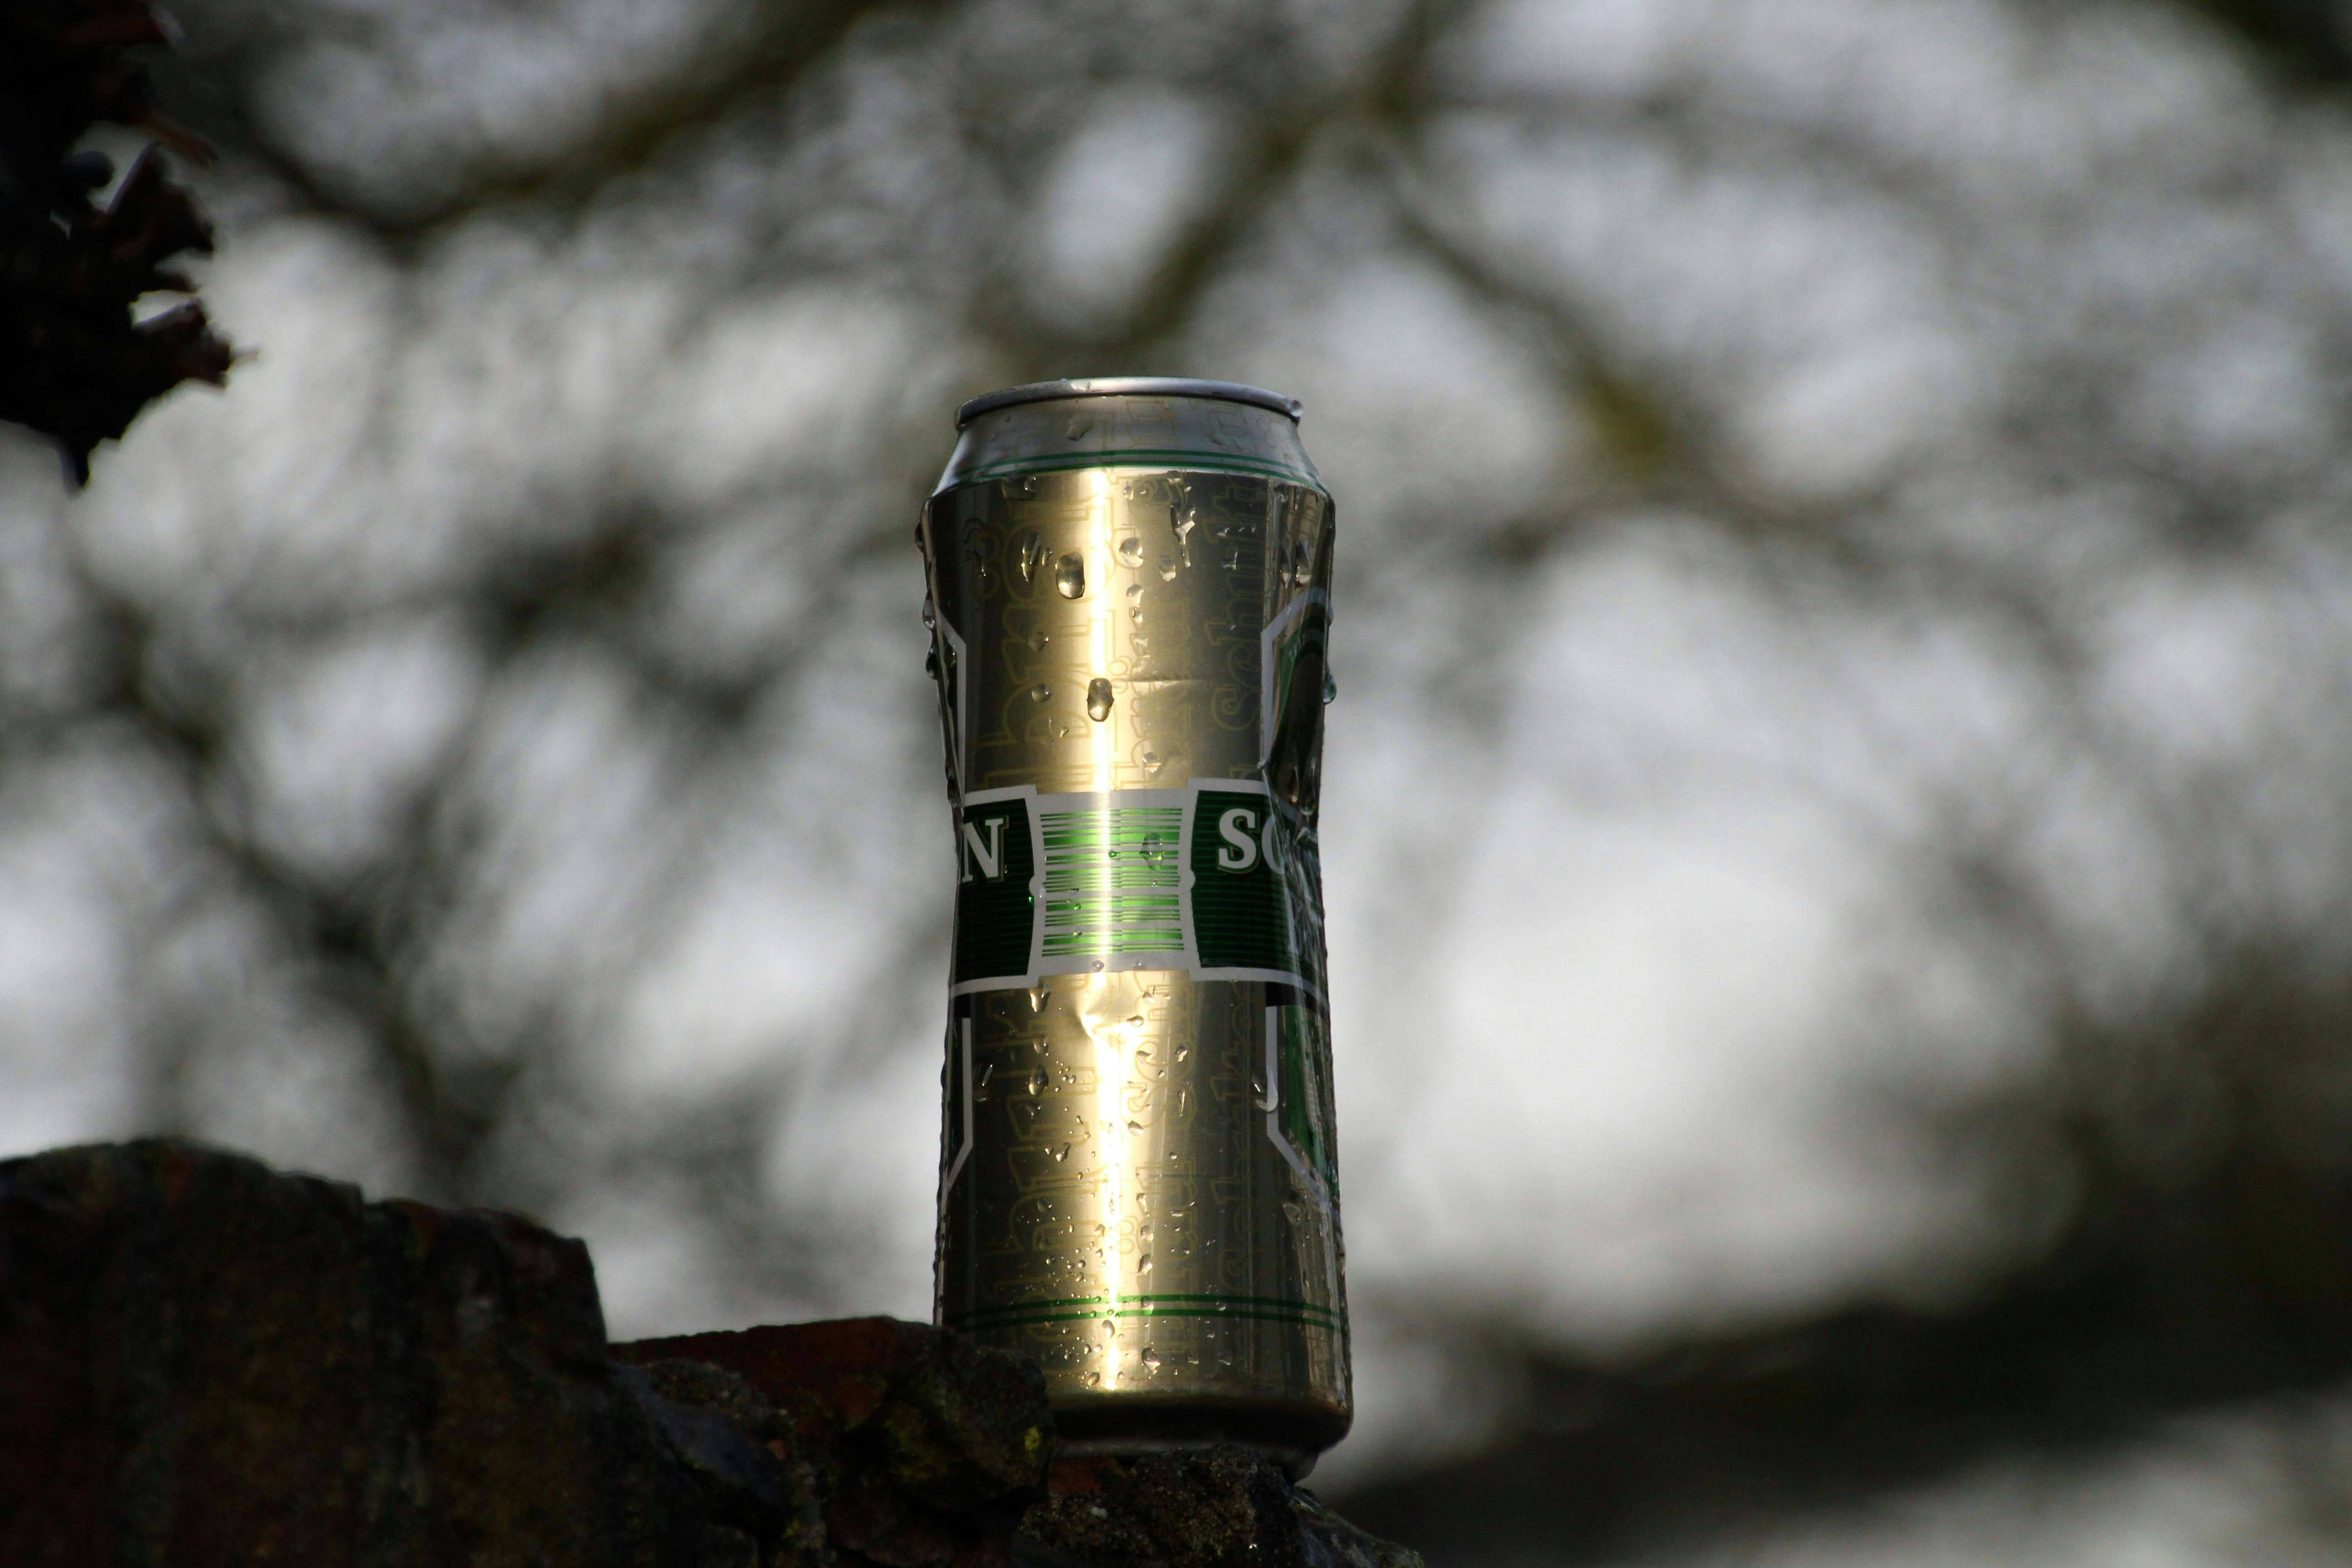 Free stock photo of A can of beer